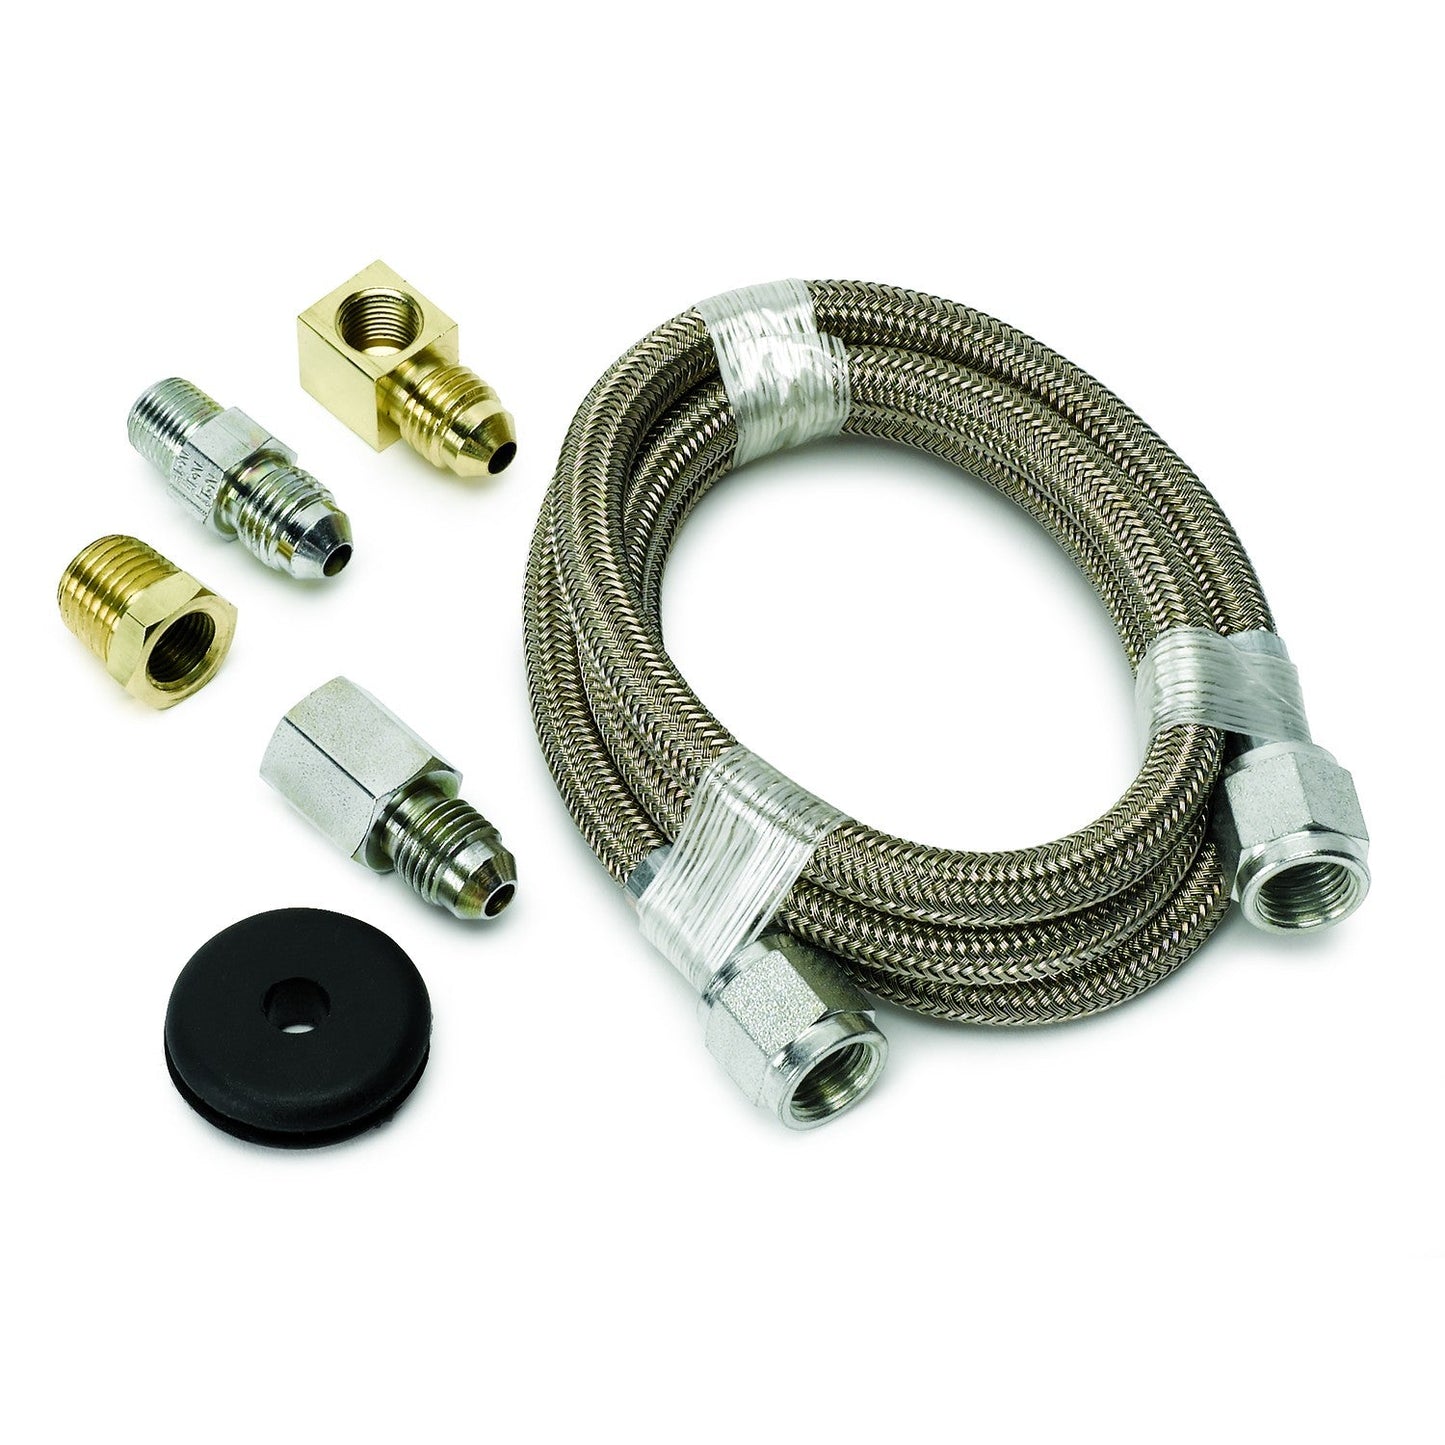 AutoMeter - LINE, BRAIDED STAINLESS STEEL, #4 DIA., 3FT. LENGTH, -4AN AND 1/8" NPTF FITTINGS (3227)